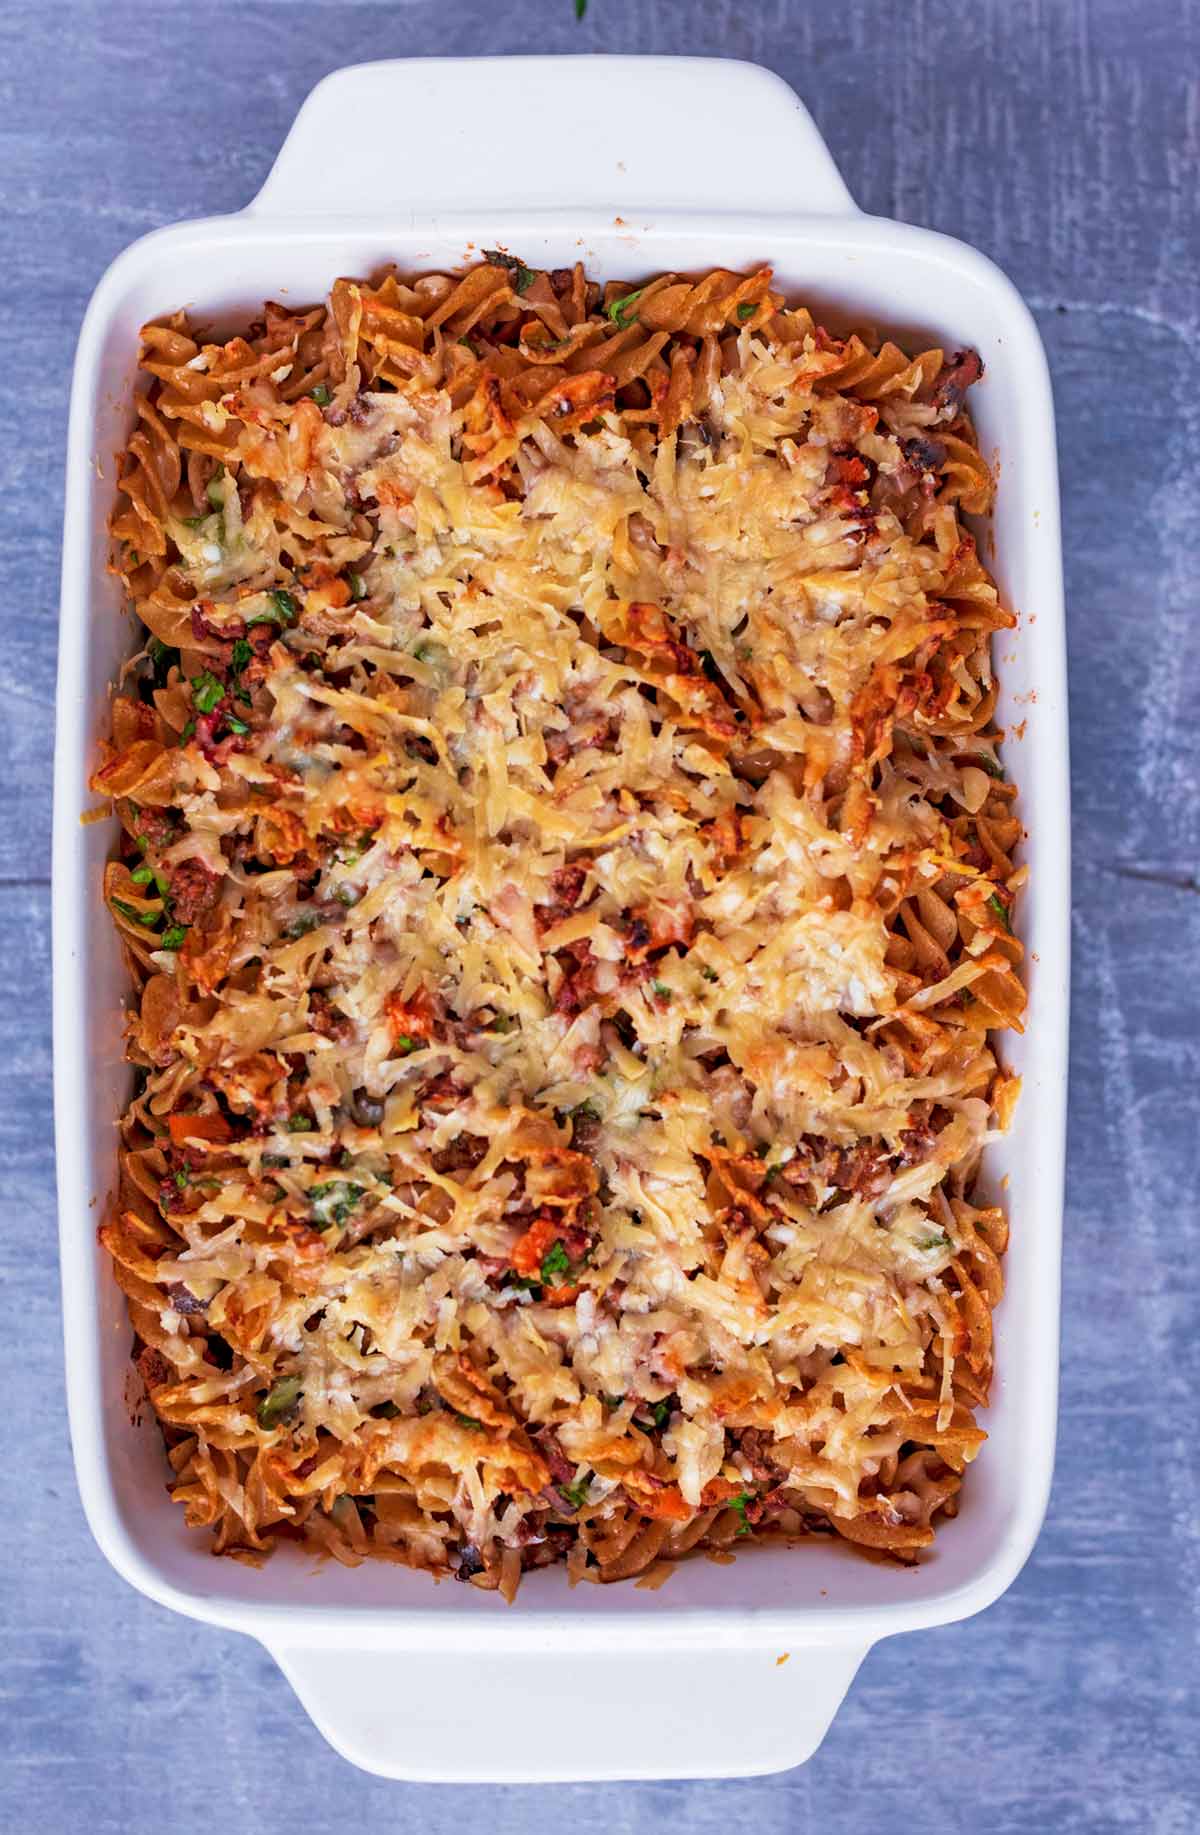 Bolognese pasta bake in a baking dish covered in melted cheese.